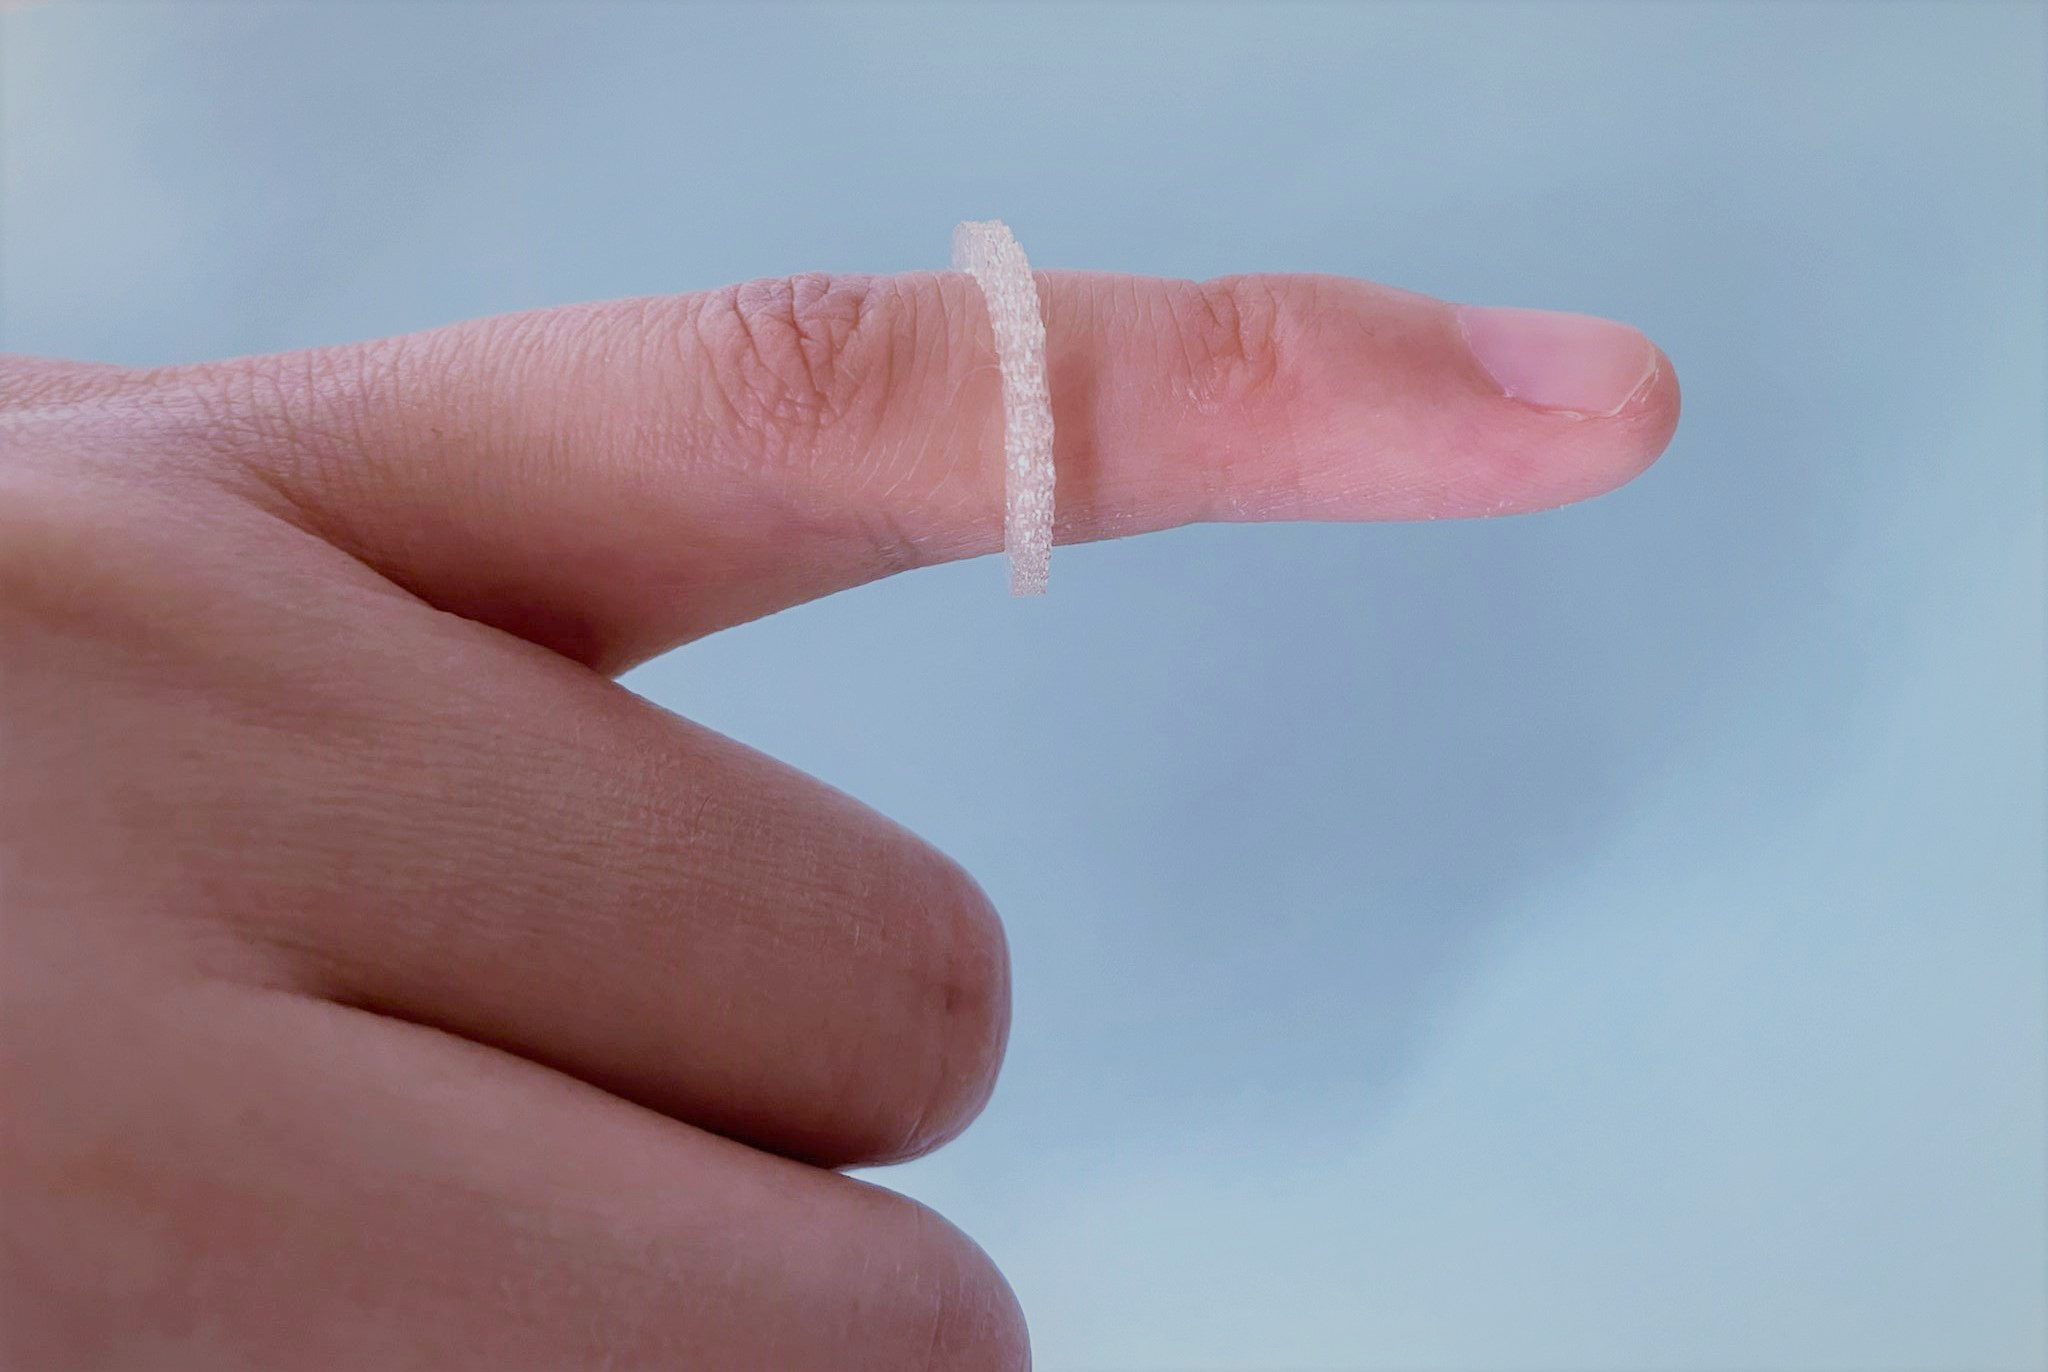 3D printed insect-repellent ring on a finger